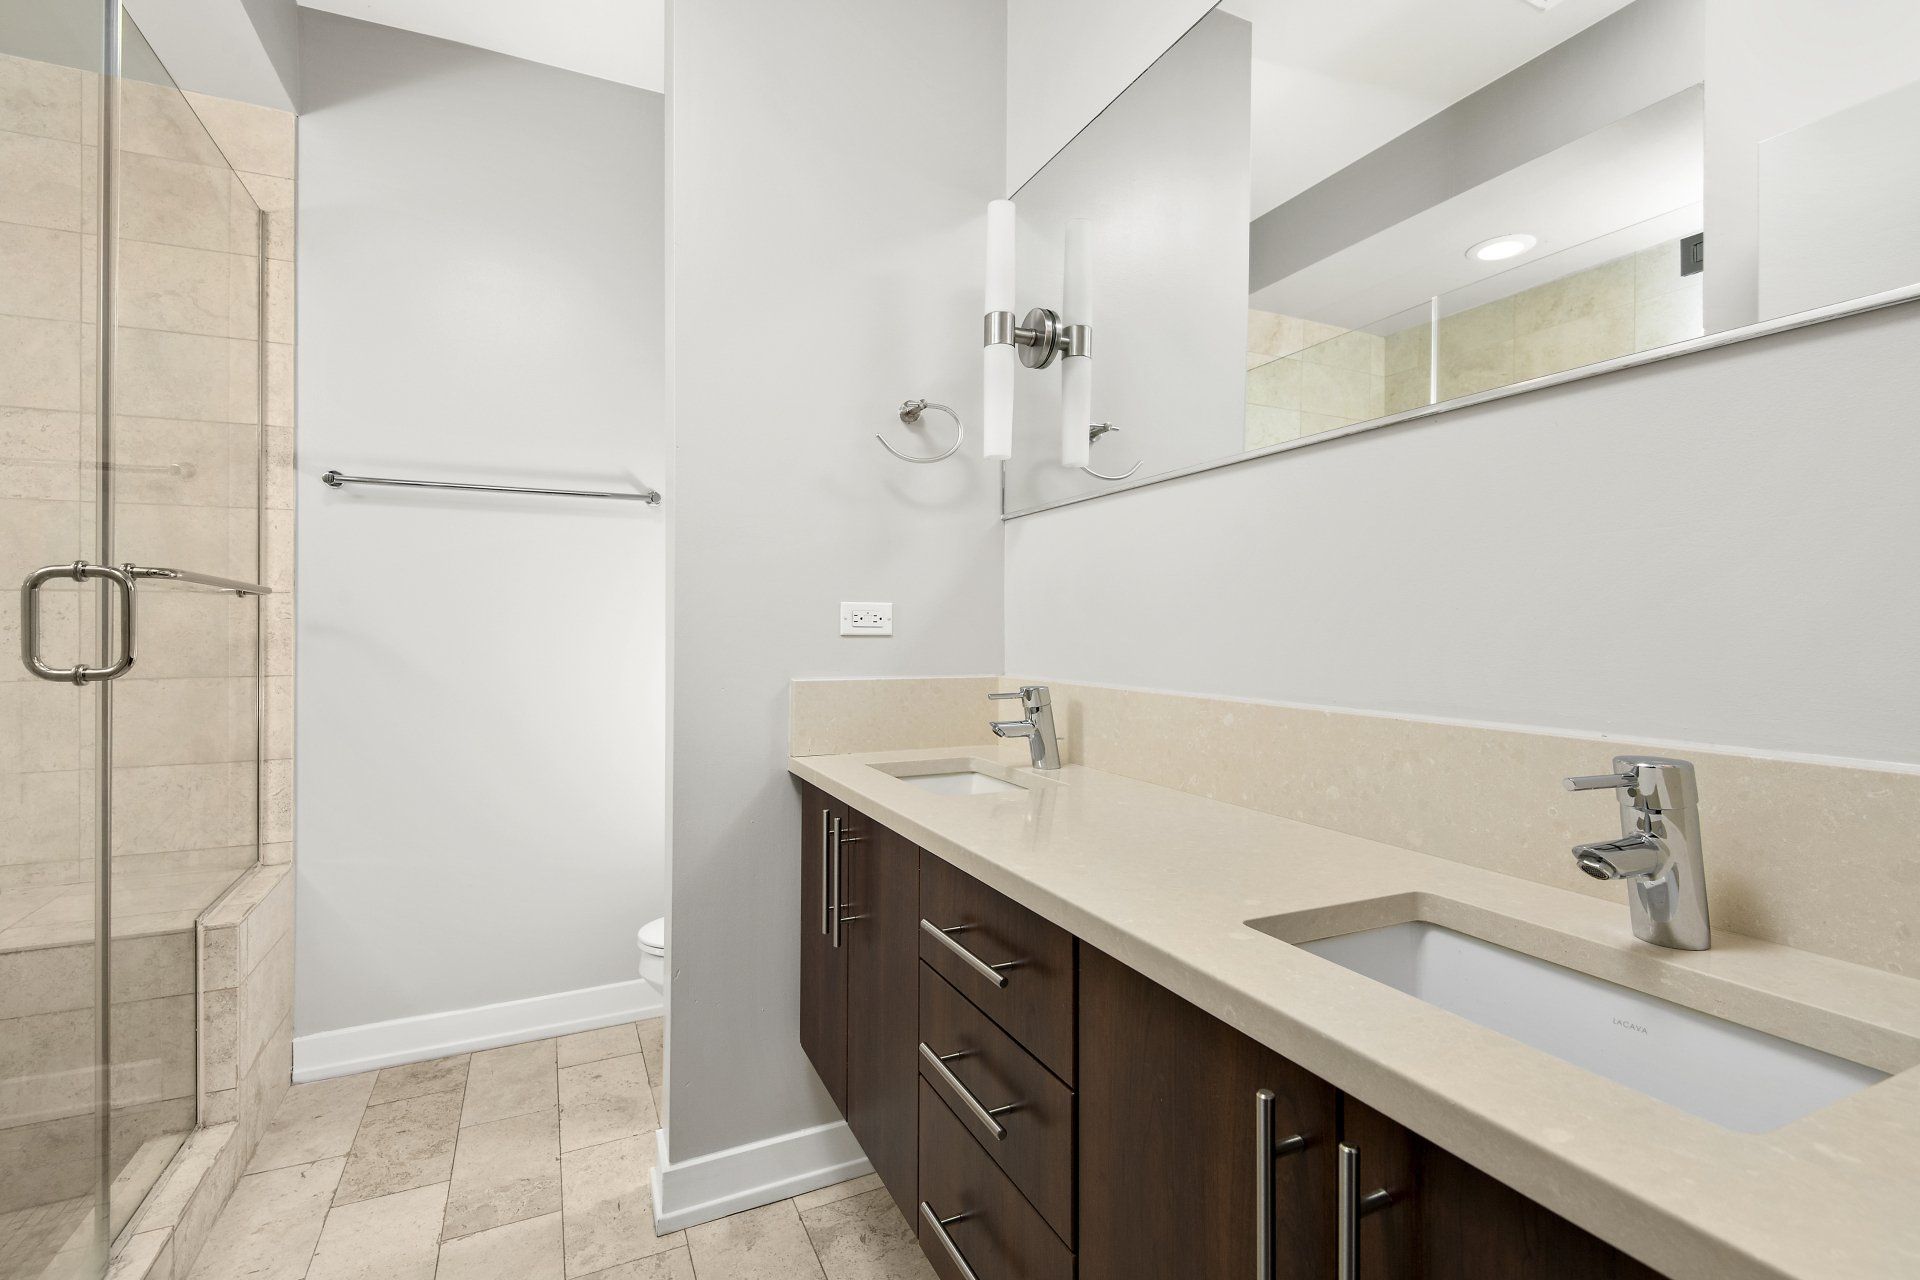 Apartment bathroom with two sinks and a walk-in shower at 1846 W Division Street.